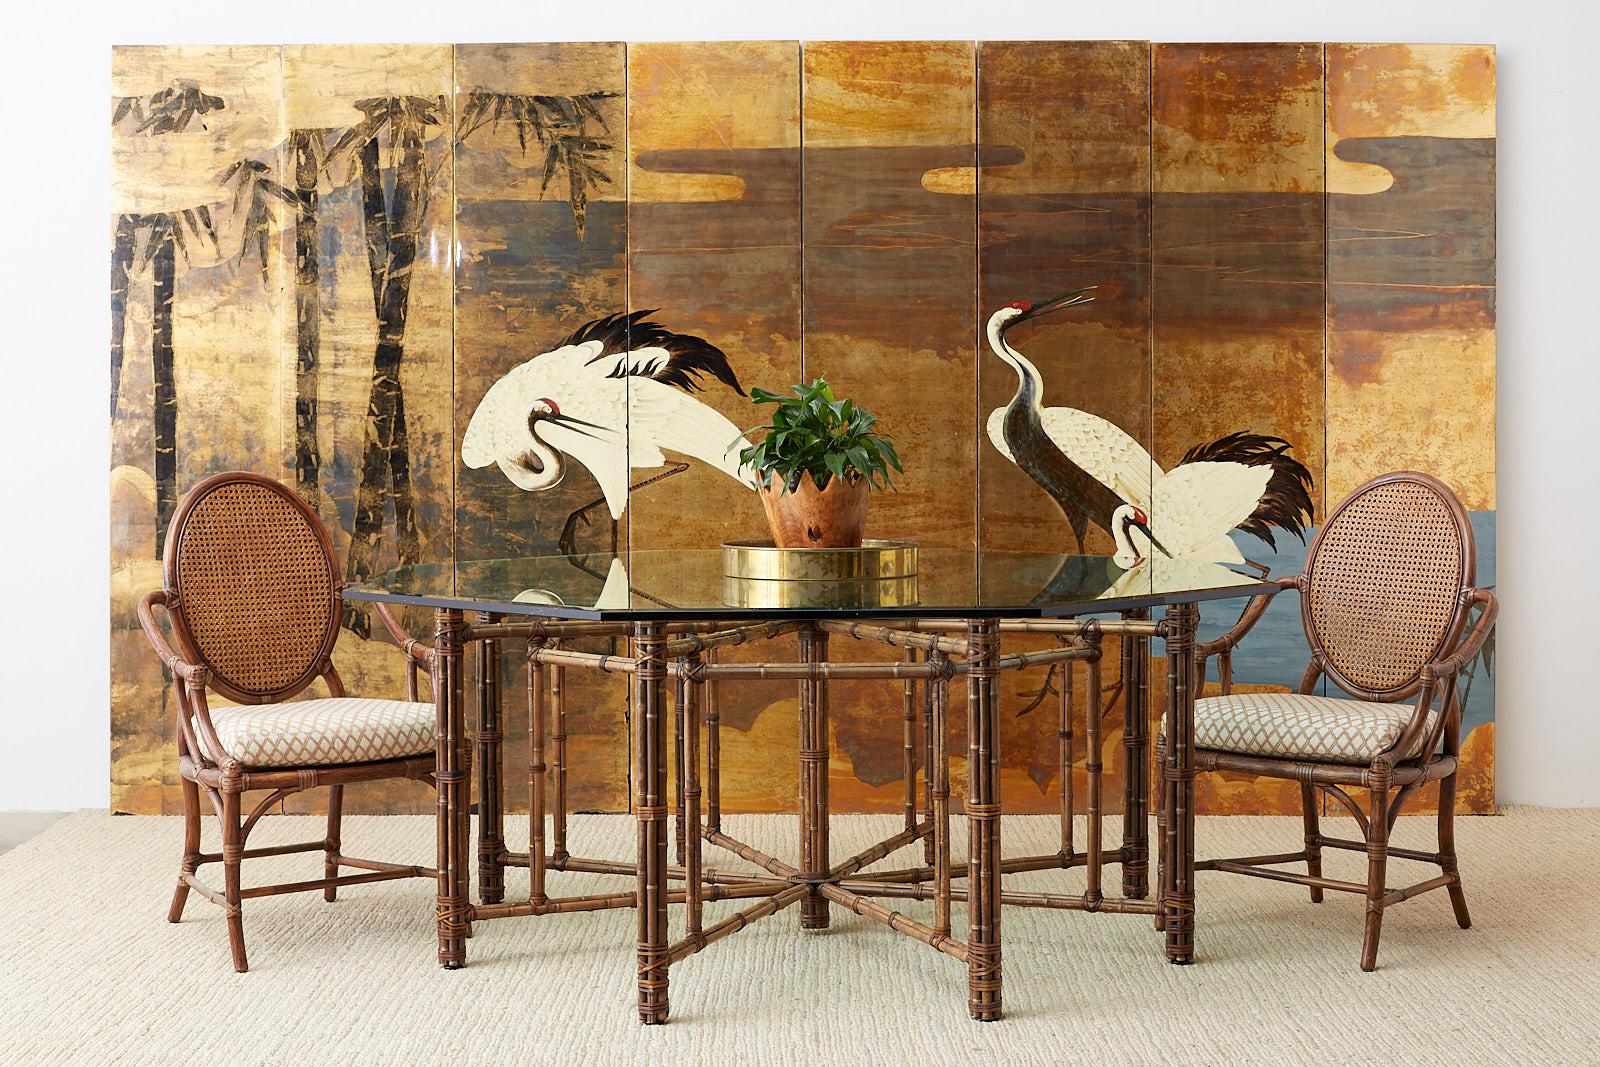 Monumental contemporary Japanese eight panel screen featuring a three crane landscape scene. Painted on squares of gold leaf in an Edo period Kano School style and manner. Each panel has a high gloss lacquer finish with an ebonized finish on the